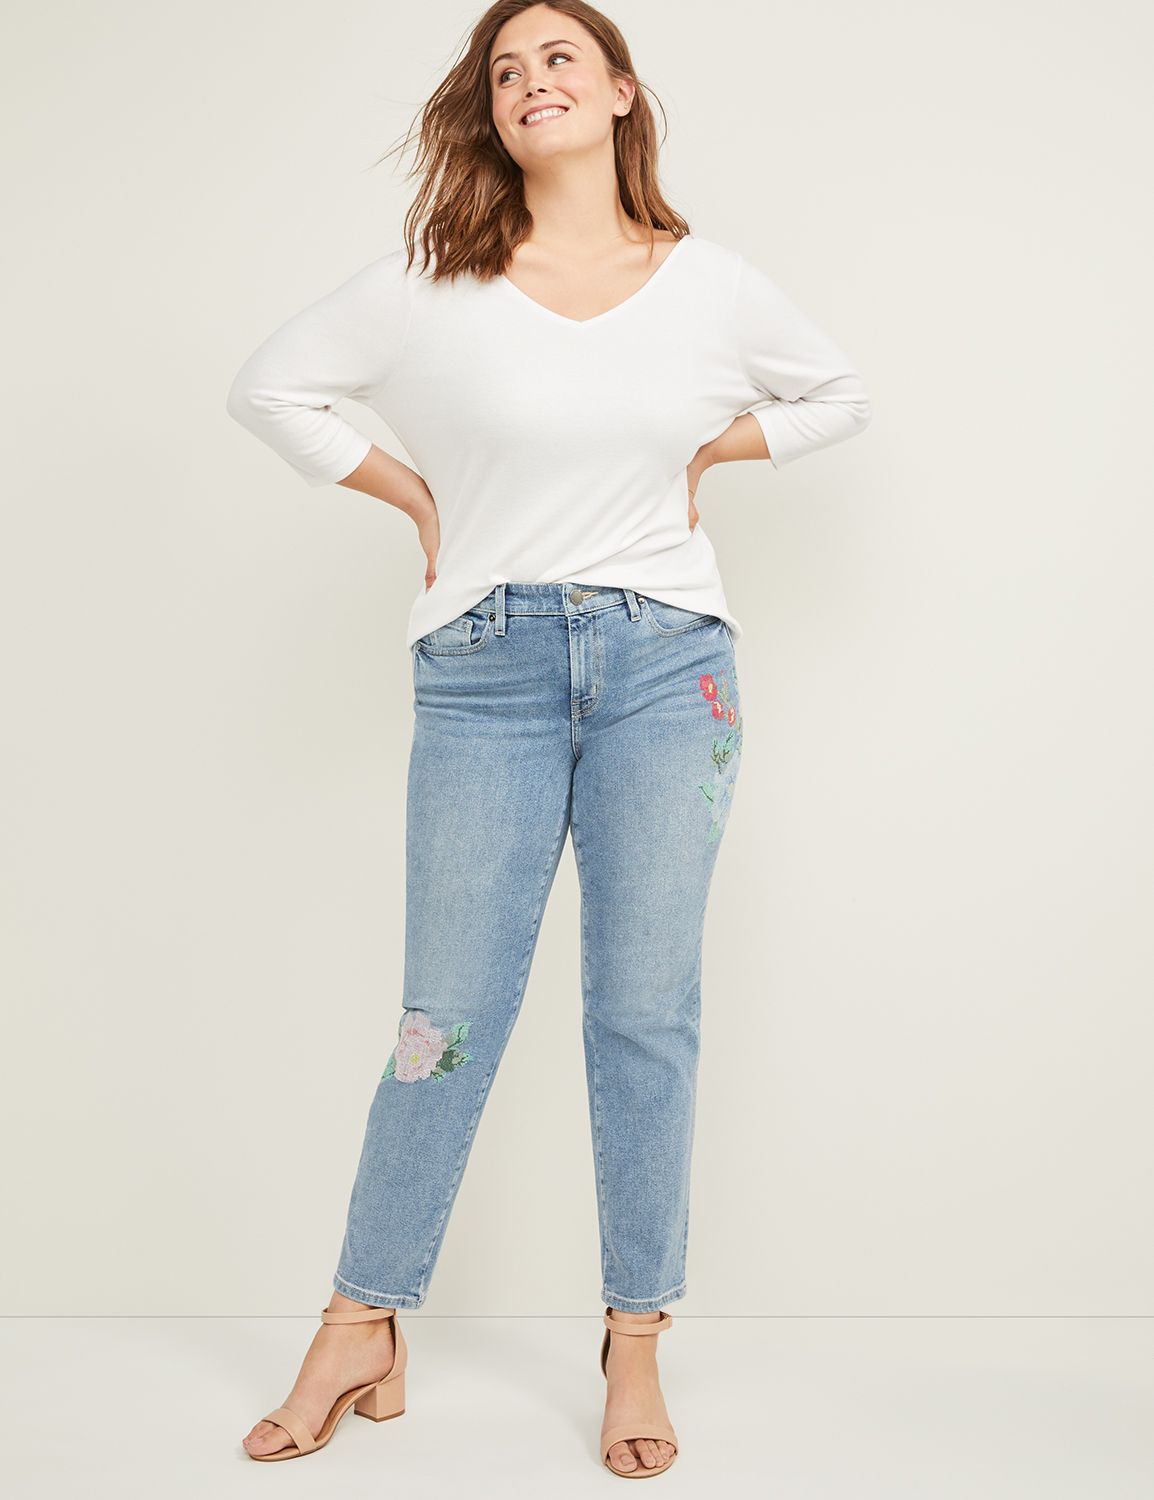 lane bryant embroidered jeans